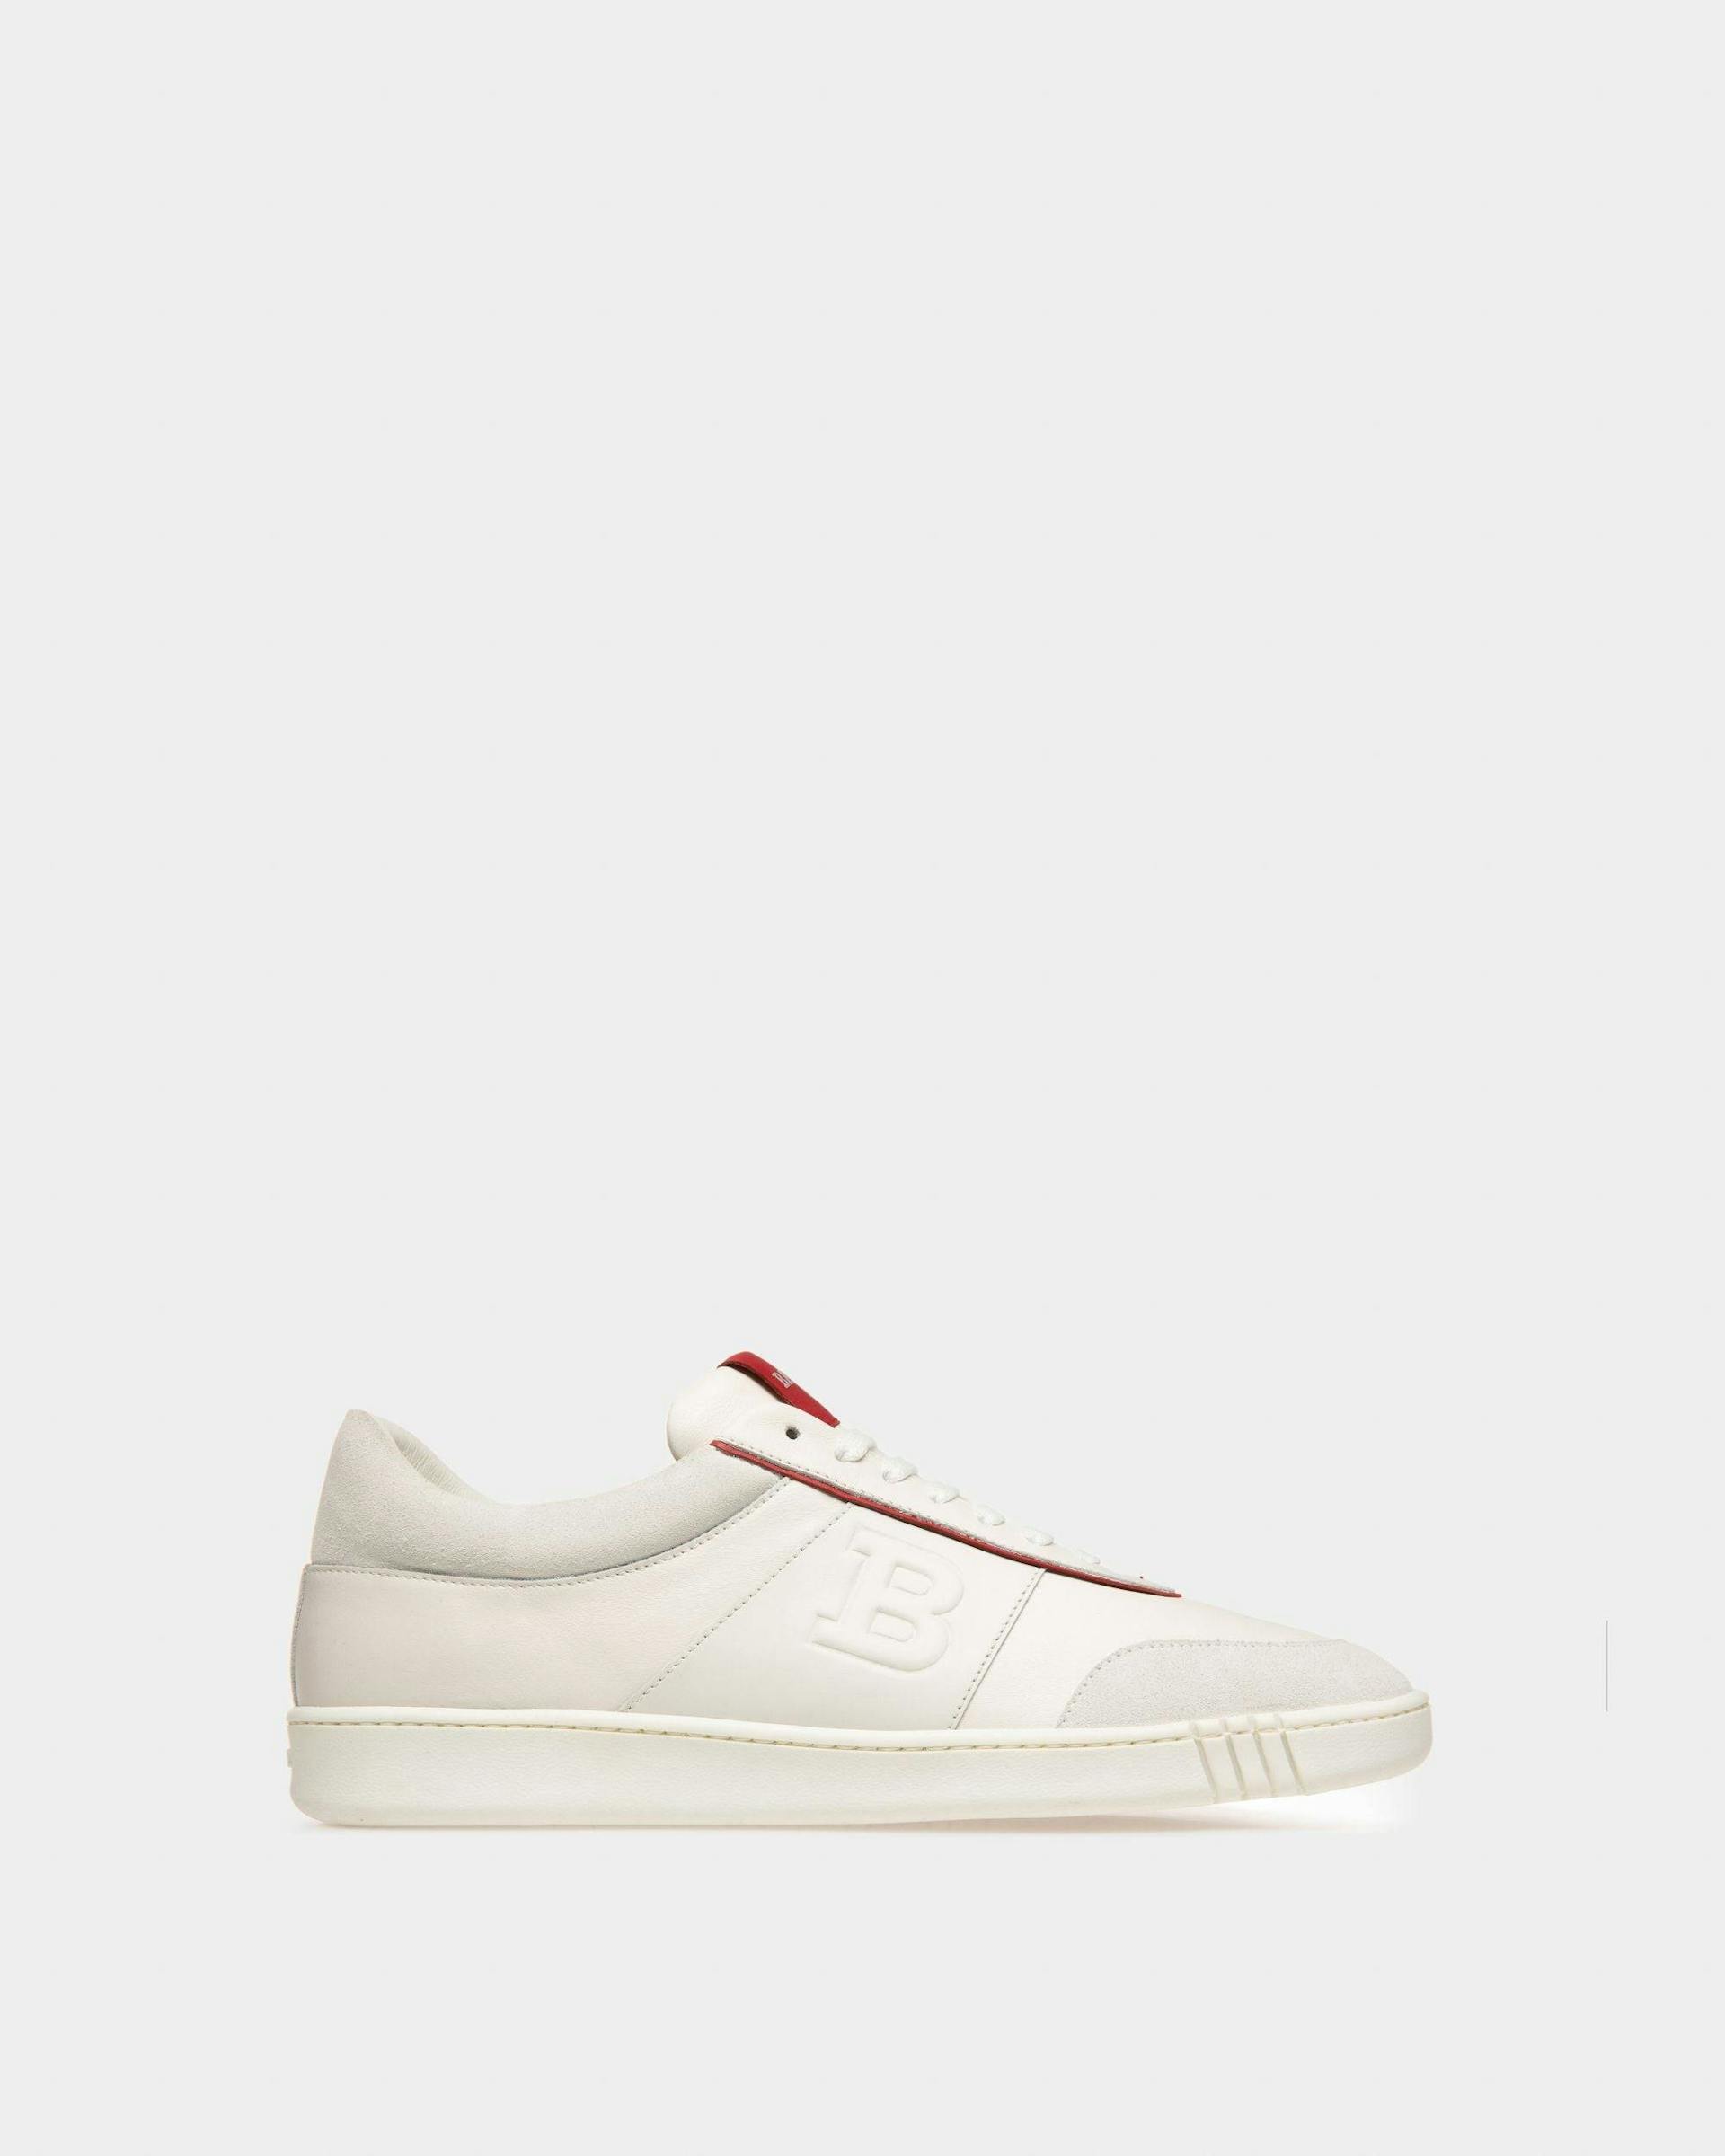 Wallys Leather And Suede Sneaker In White And Red - Men's - Bally - 01